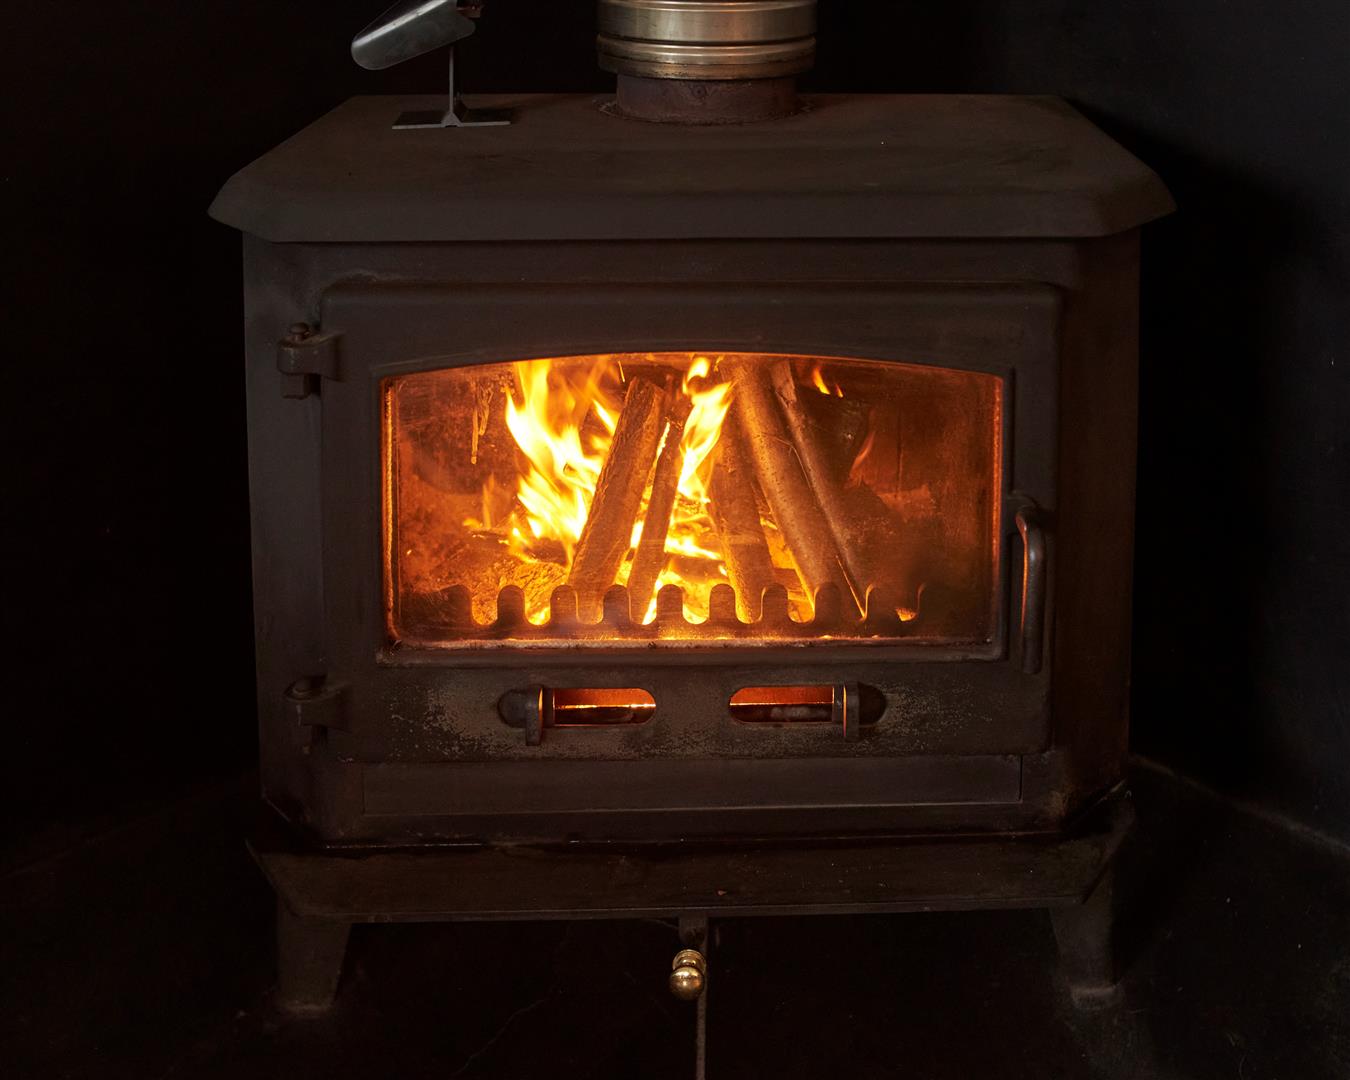 Wood burning stove with fire alight